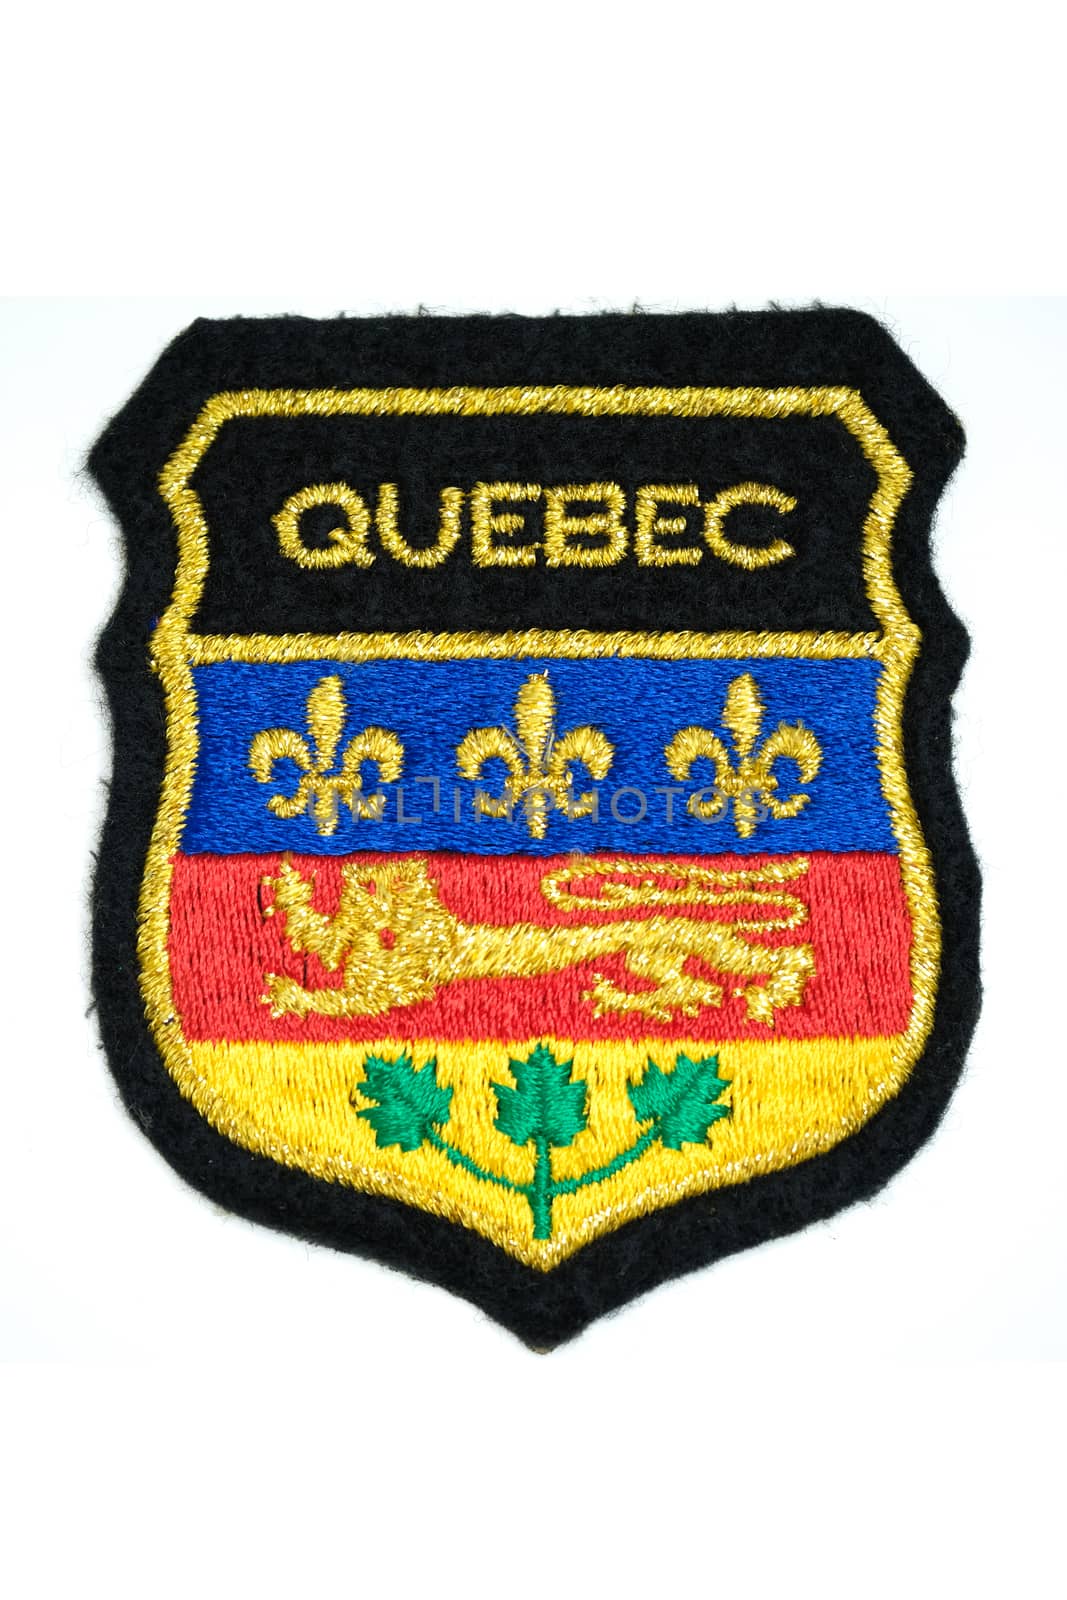 code of arms of the Province of Quebec by Nawoot